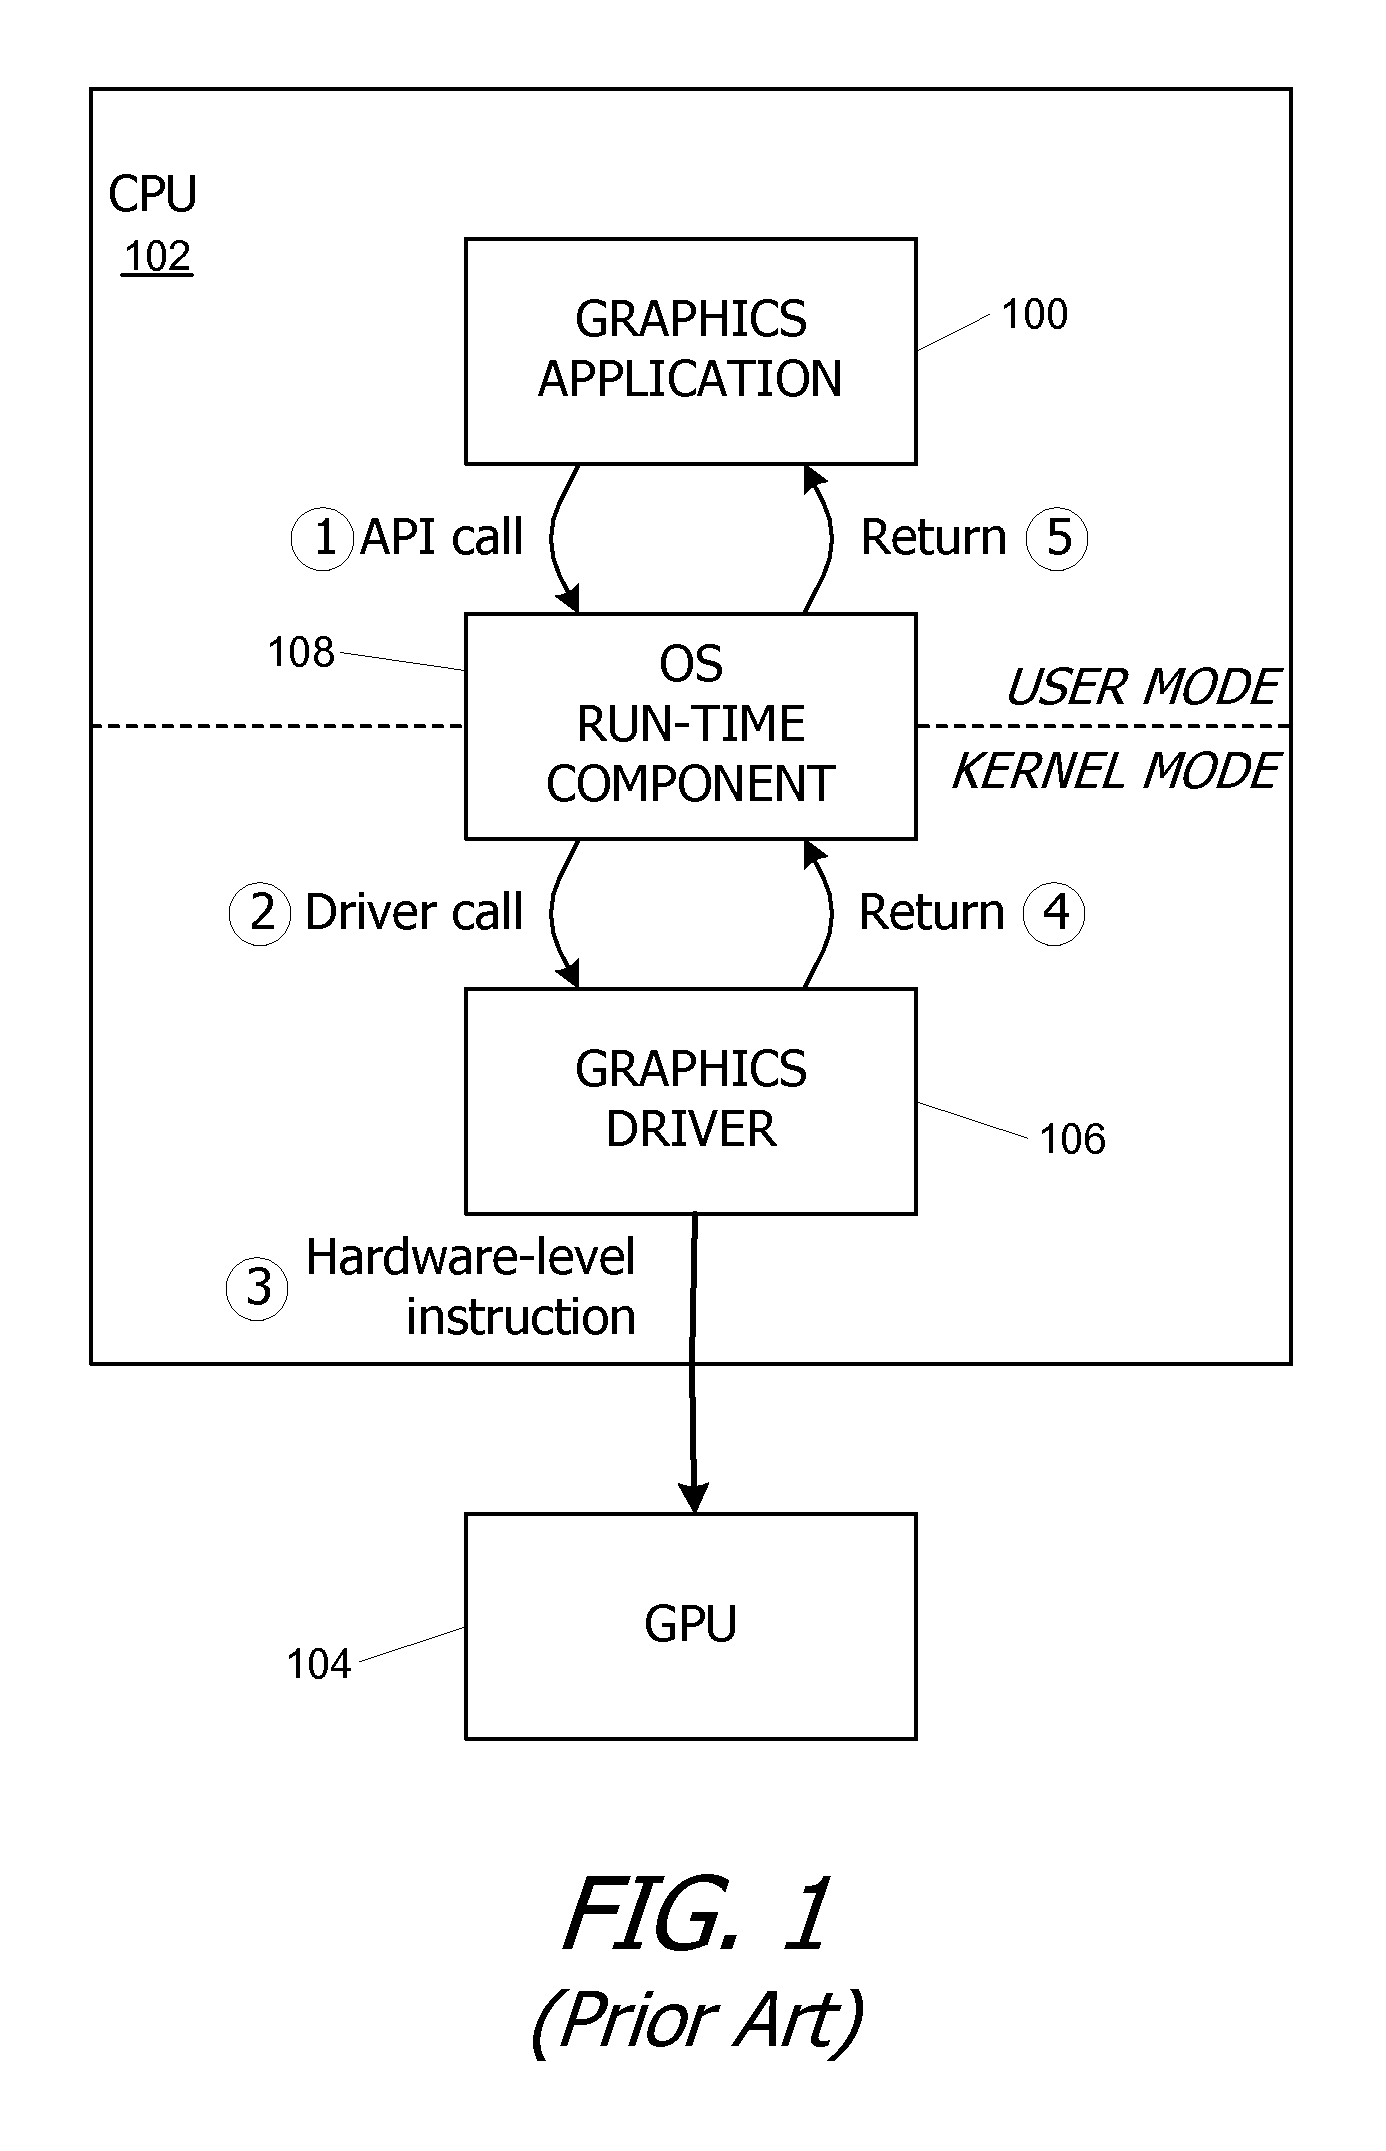 Kernel mode graphics driver for dual-core computer system